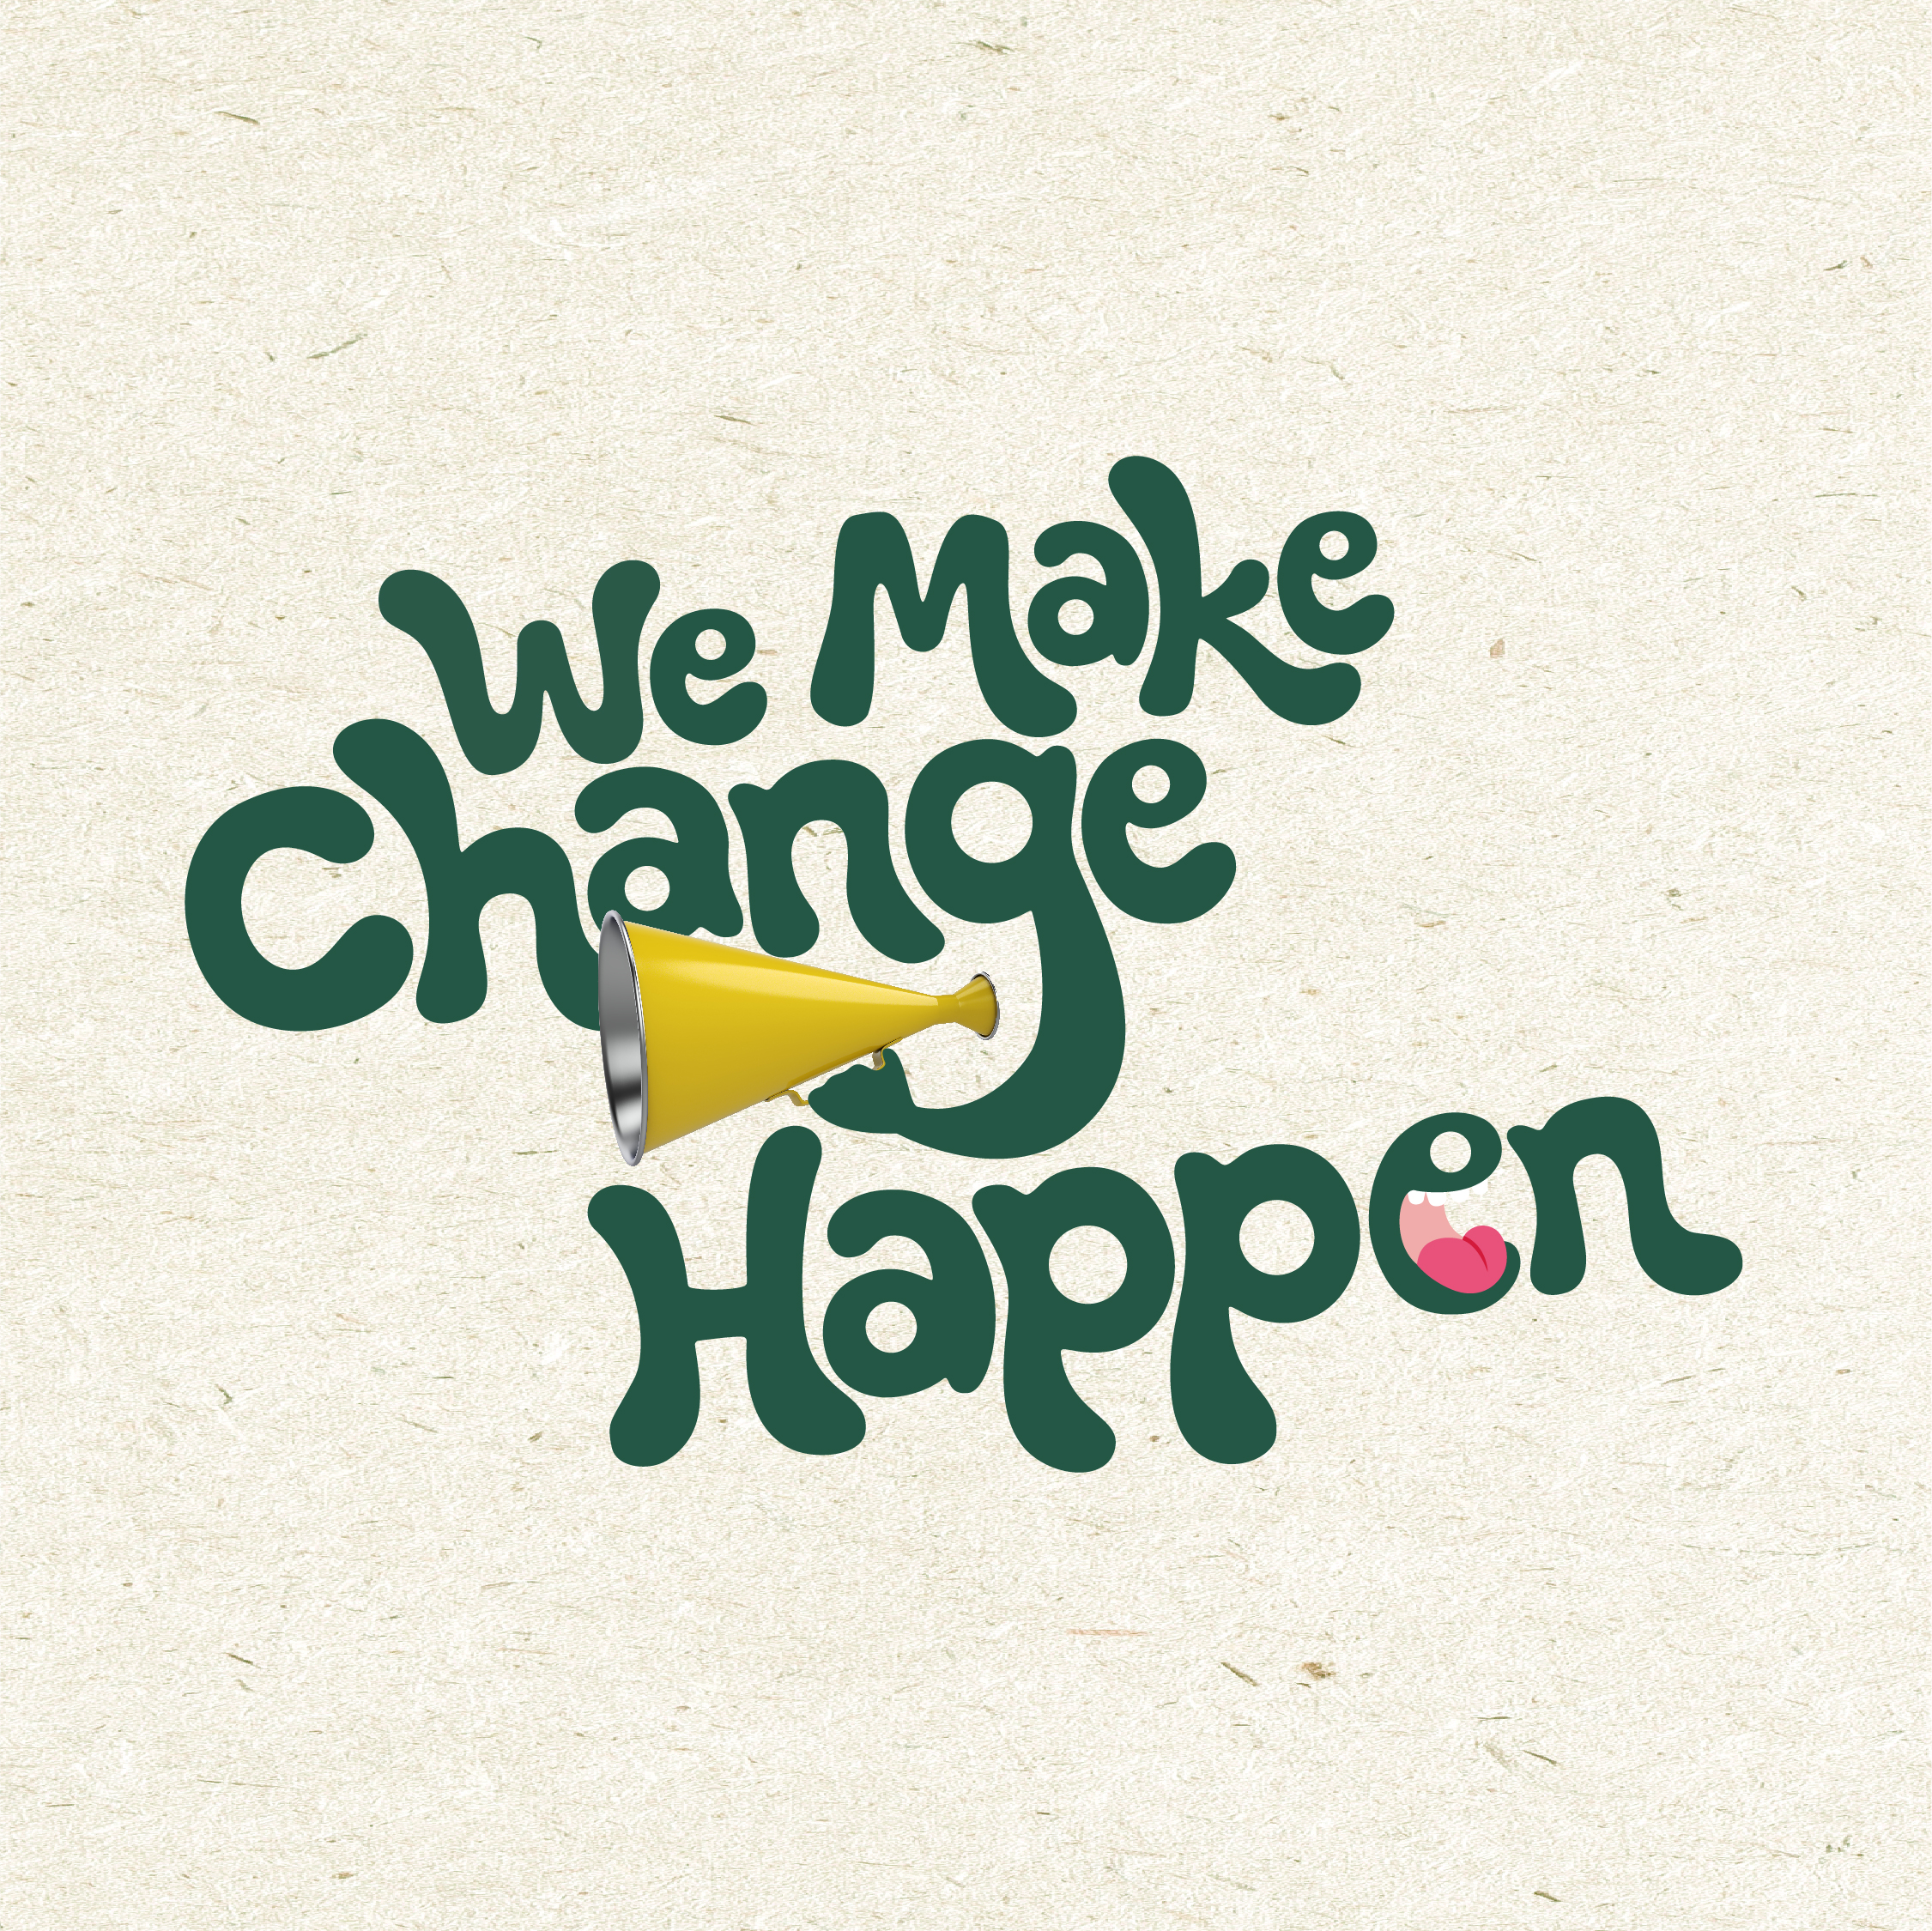 We make change happen text with two hands holding an old fashioned megaphone. Text is dark green and a beige textured background